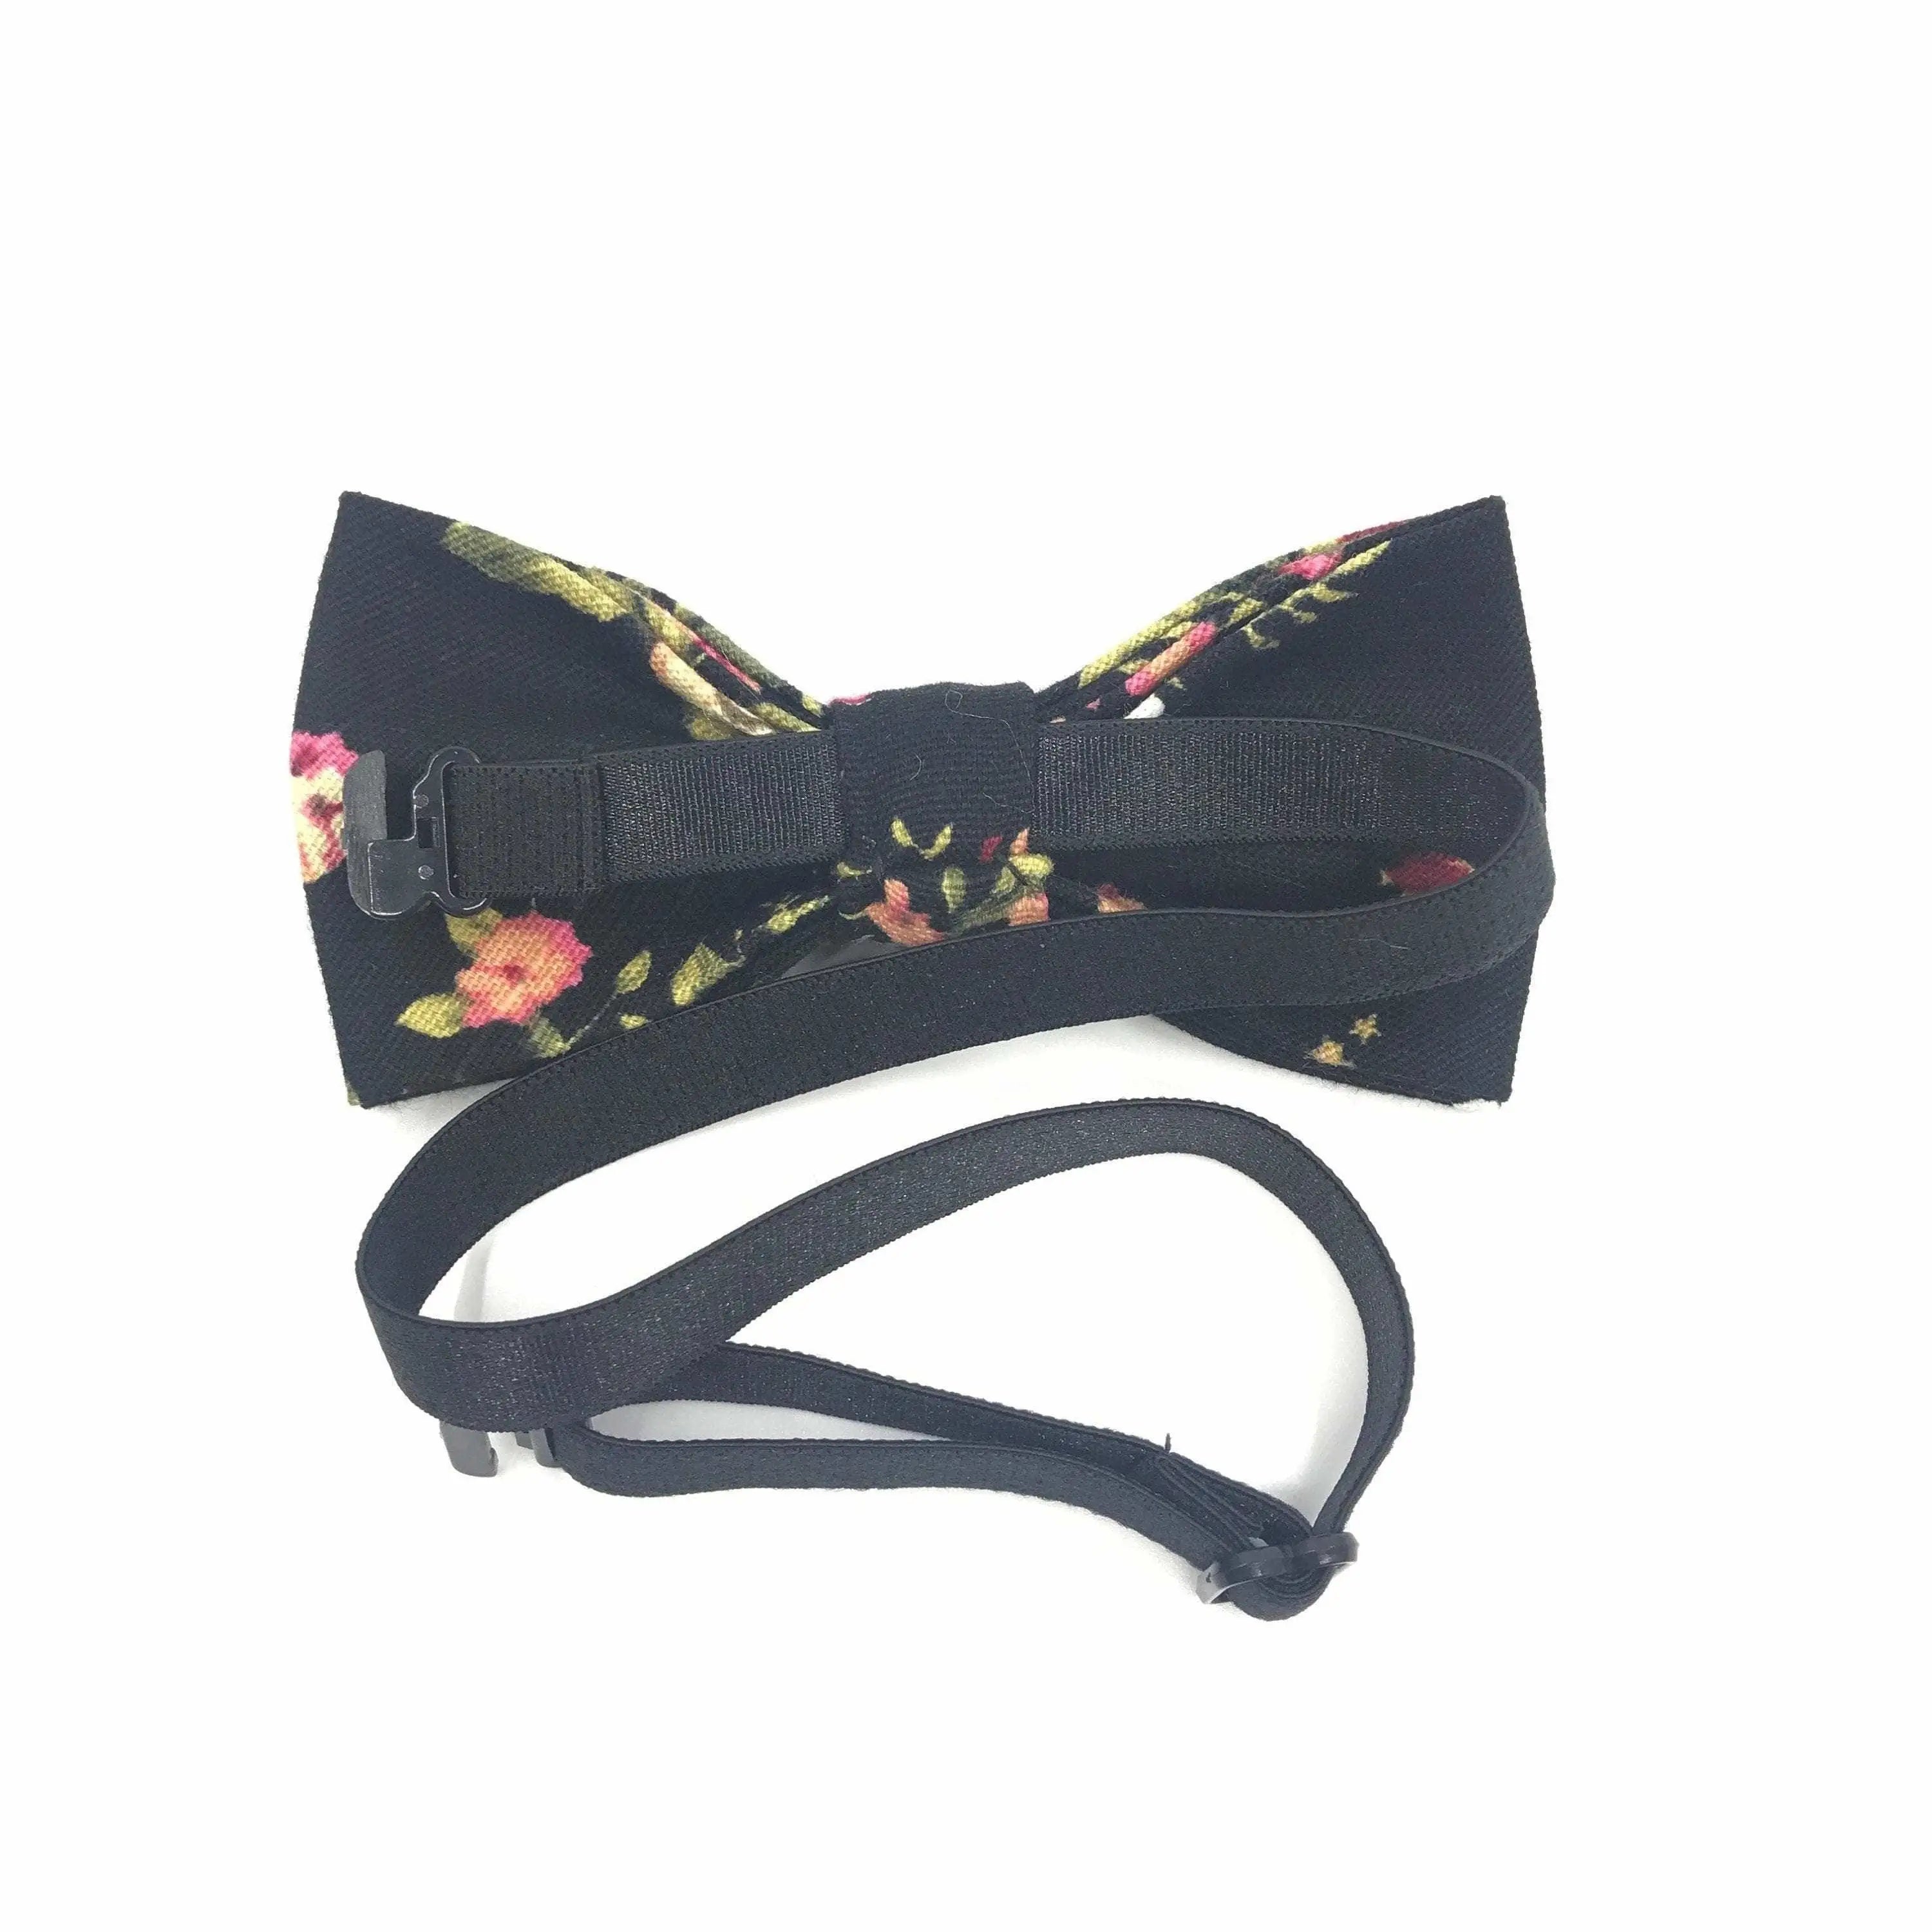 Black Floral Bow tie for kids JAKE / JAMES-Black Floral Bow tie for kids Strap is adjustablePre-Tied bowtieBow Tie 10.5 * 6CMLinen Add a touch of dapper to your little one's outfit with this JAKE Kids Floral Pre-Tied Bow Tie. This bow tie is made with high-quality fabric and construction so it'll look great wash after wash. The black floral print is perfect for any special occasions, whether it's a wedding or family gathering. Plus, the pre-tied design makes it easy to put on and take off. Great